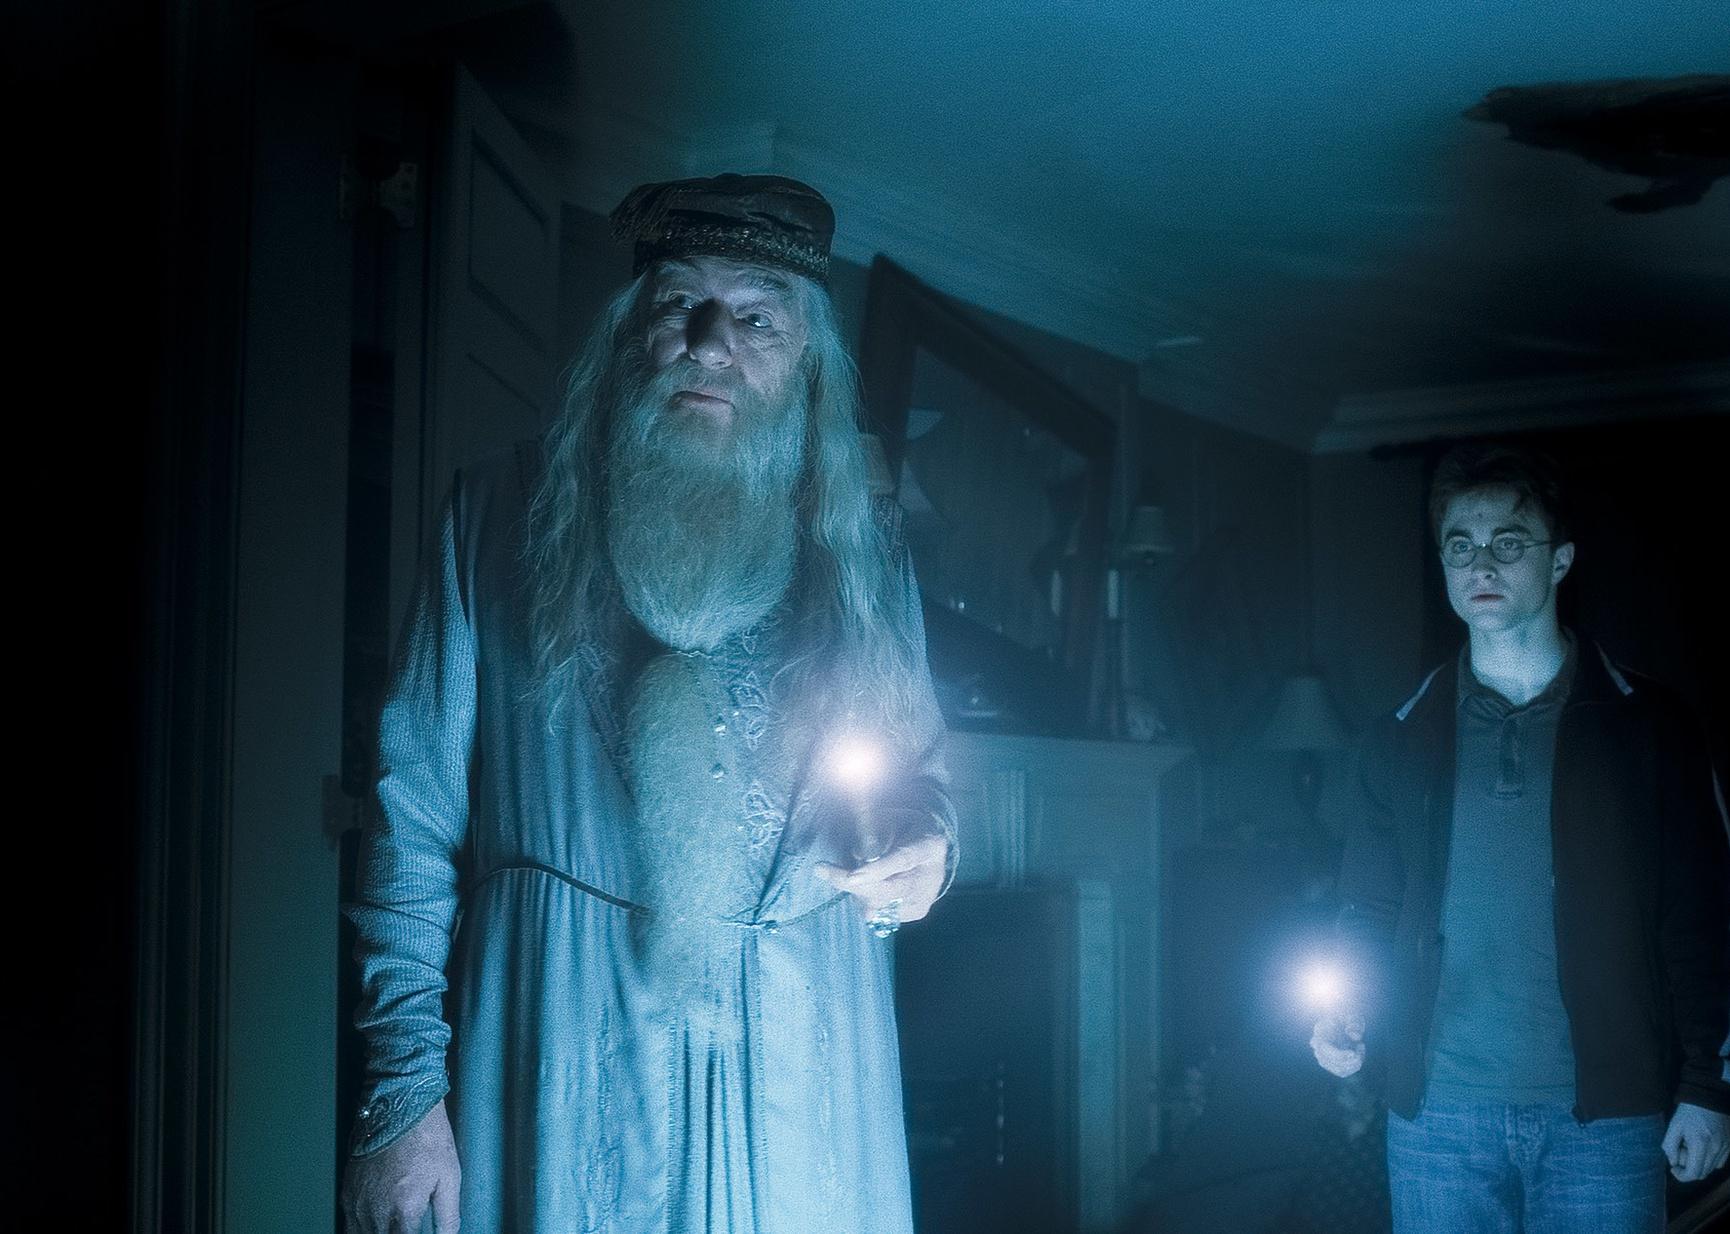 Michael Gambon and Daniel Radcliffe shining flashlights at night in a room.